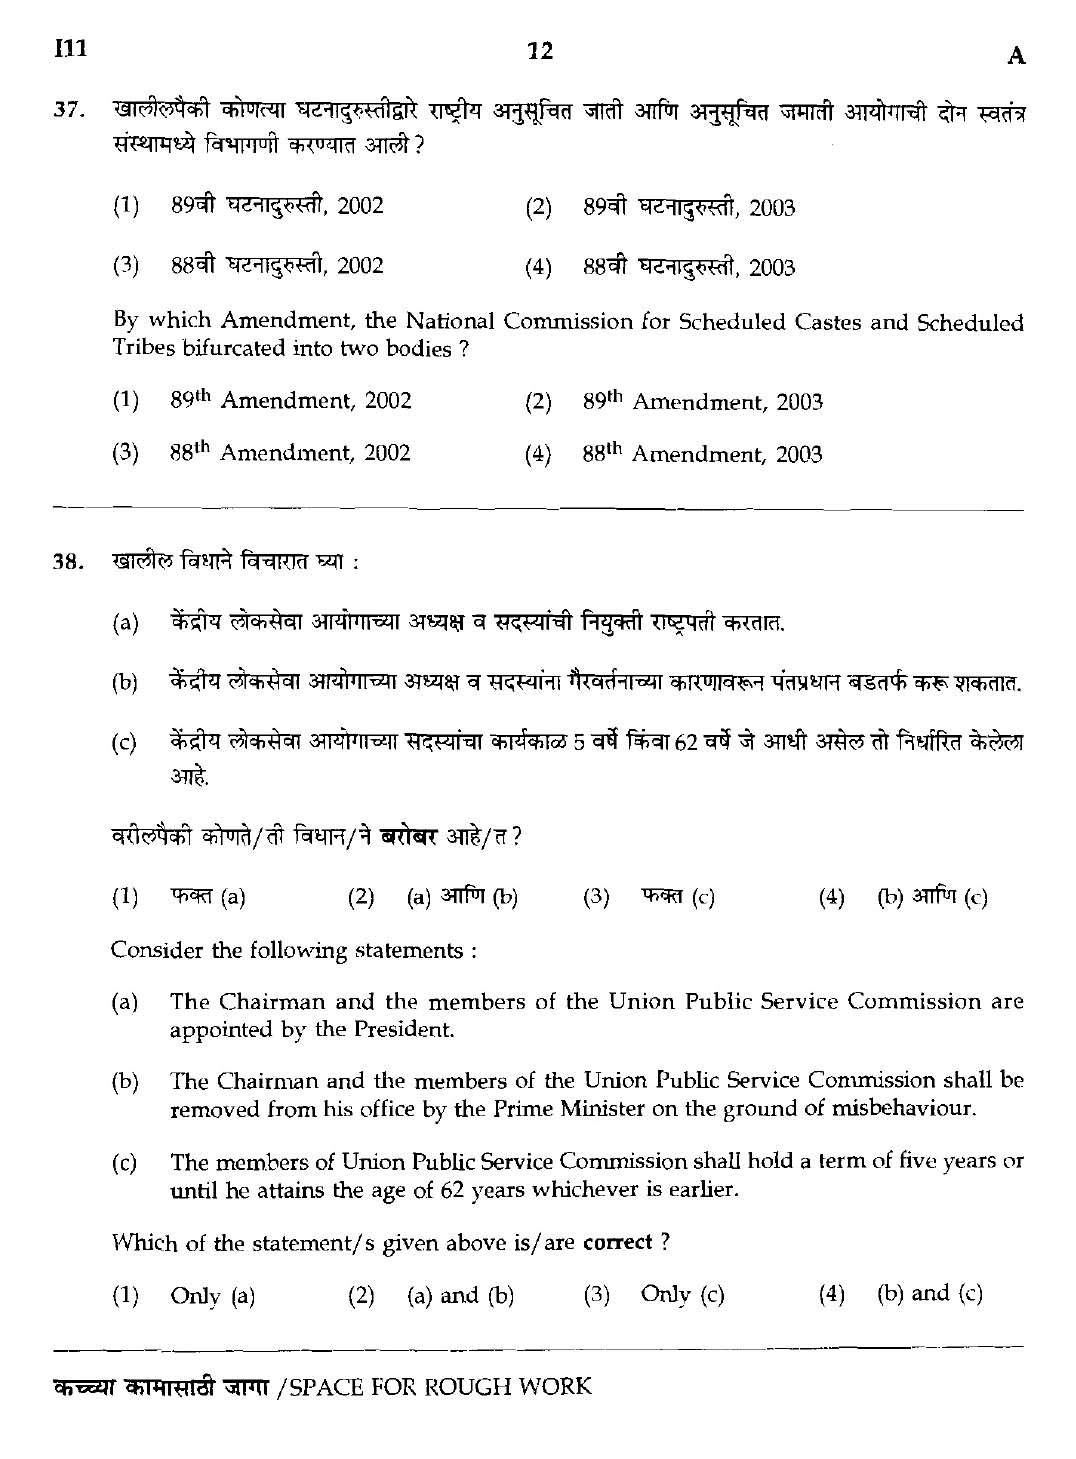 MPSC Agricultural Services Preliminary Exam 2018 Question Paper 11